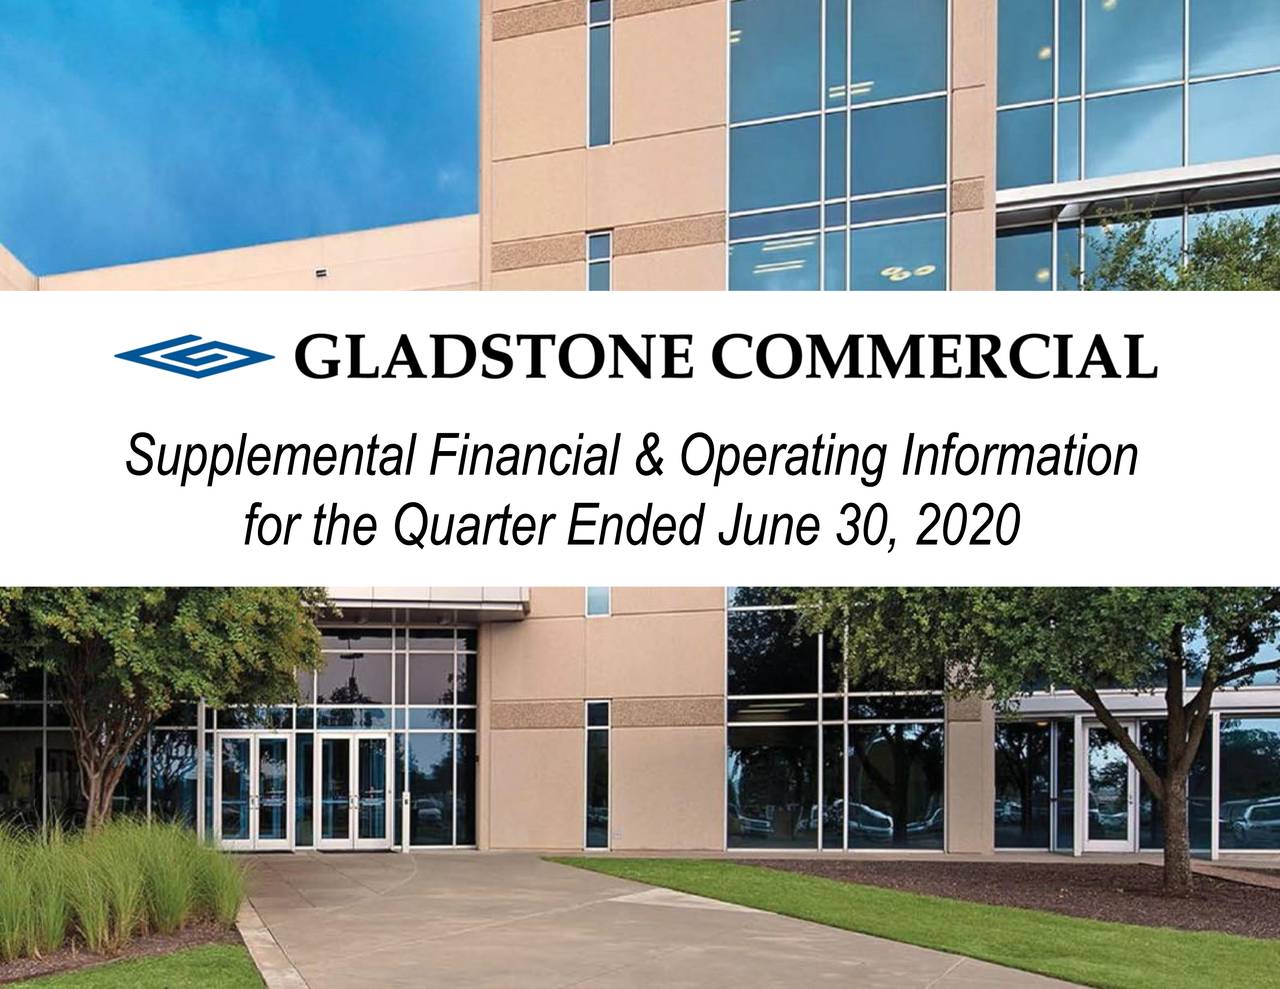 Gladstone Commercial Corporation 2020 Q2 - Results - Earnings Call Presentation